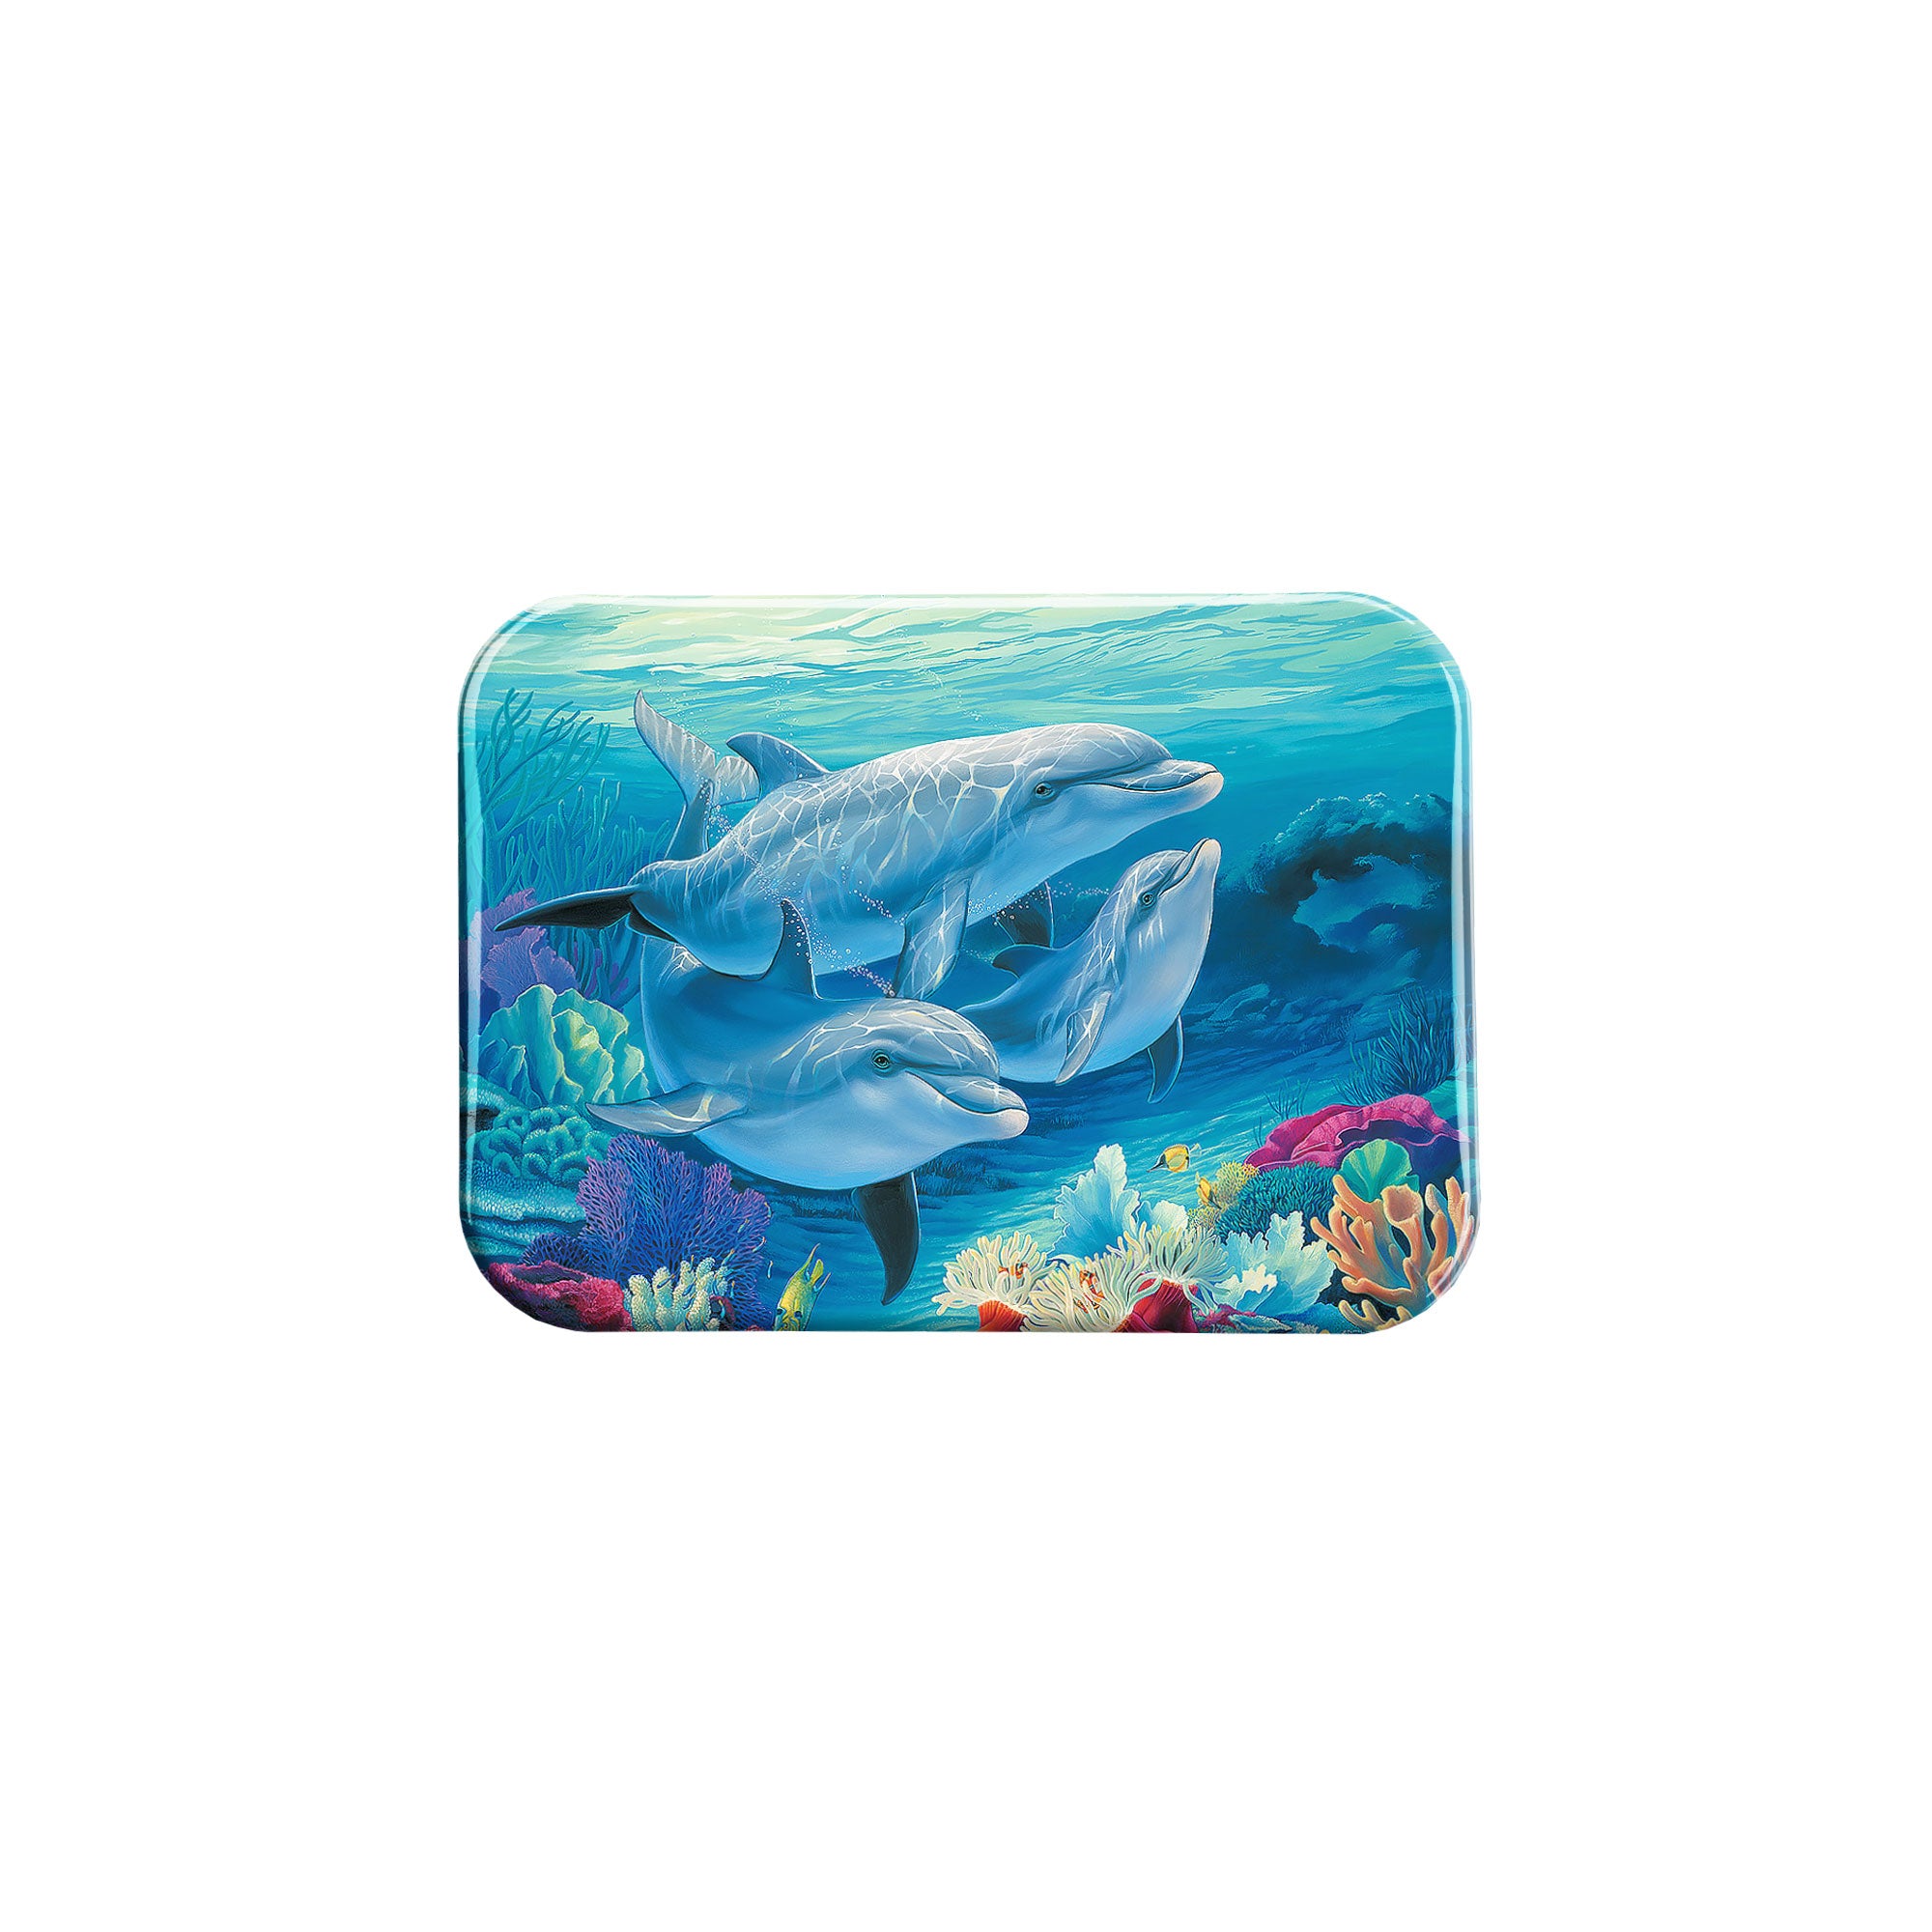 "For Dolphin Lovers" - 2.5" X 3.5" Rectangle Fridge Magnets